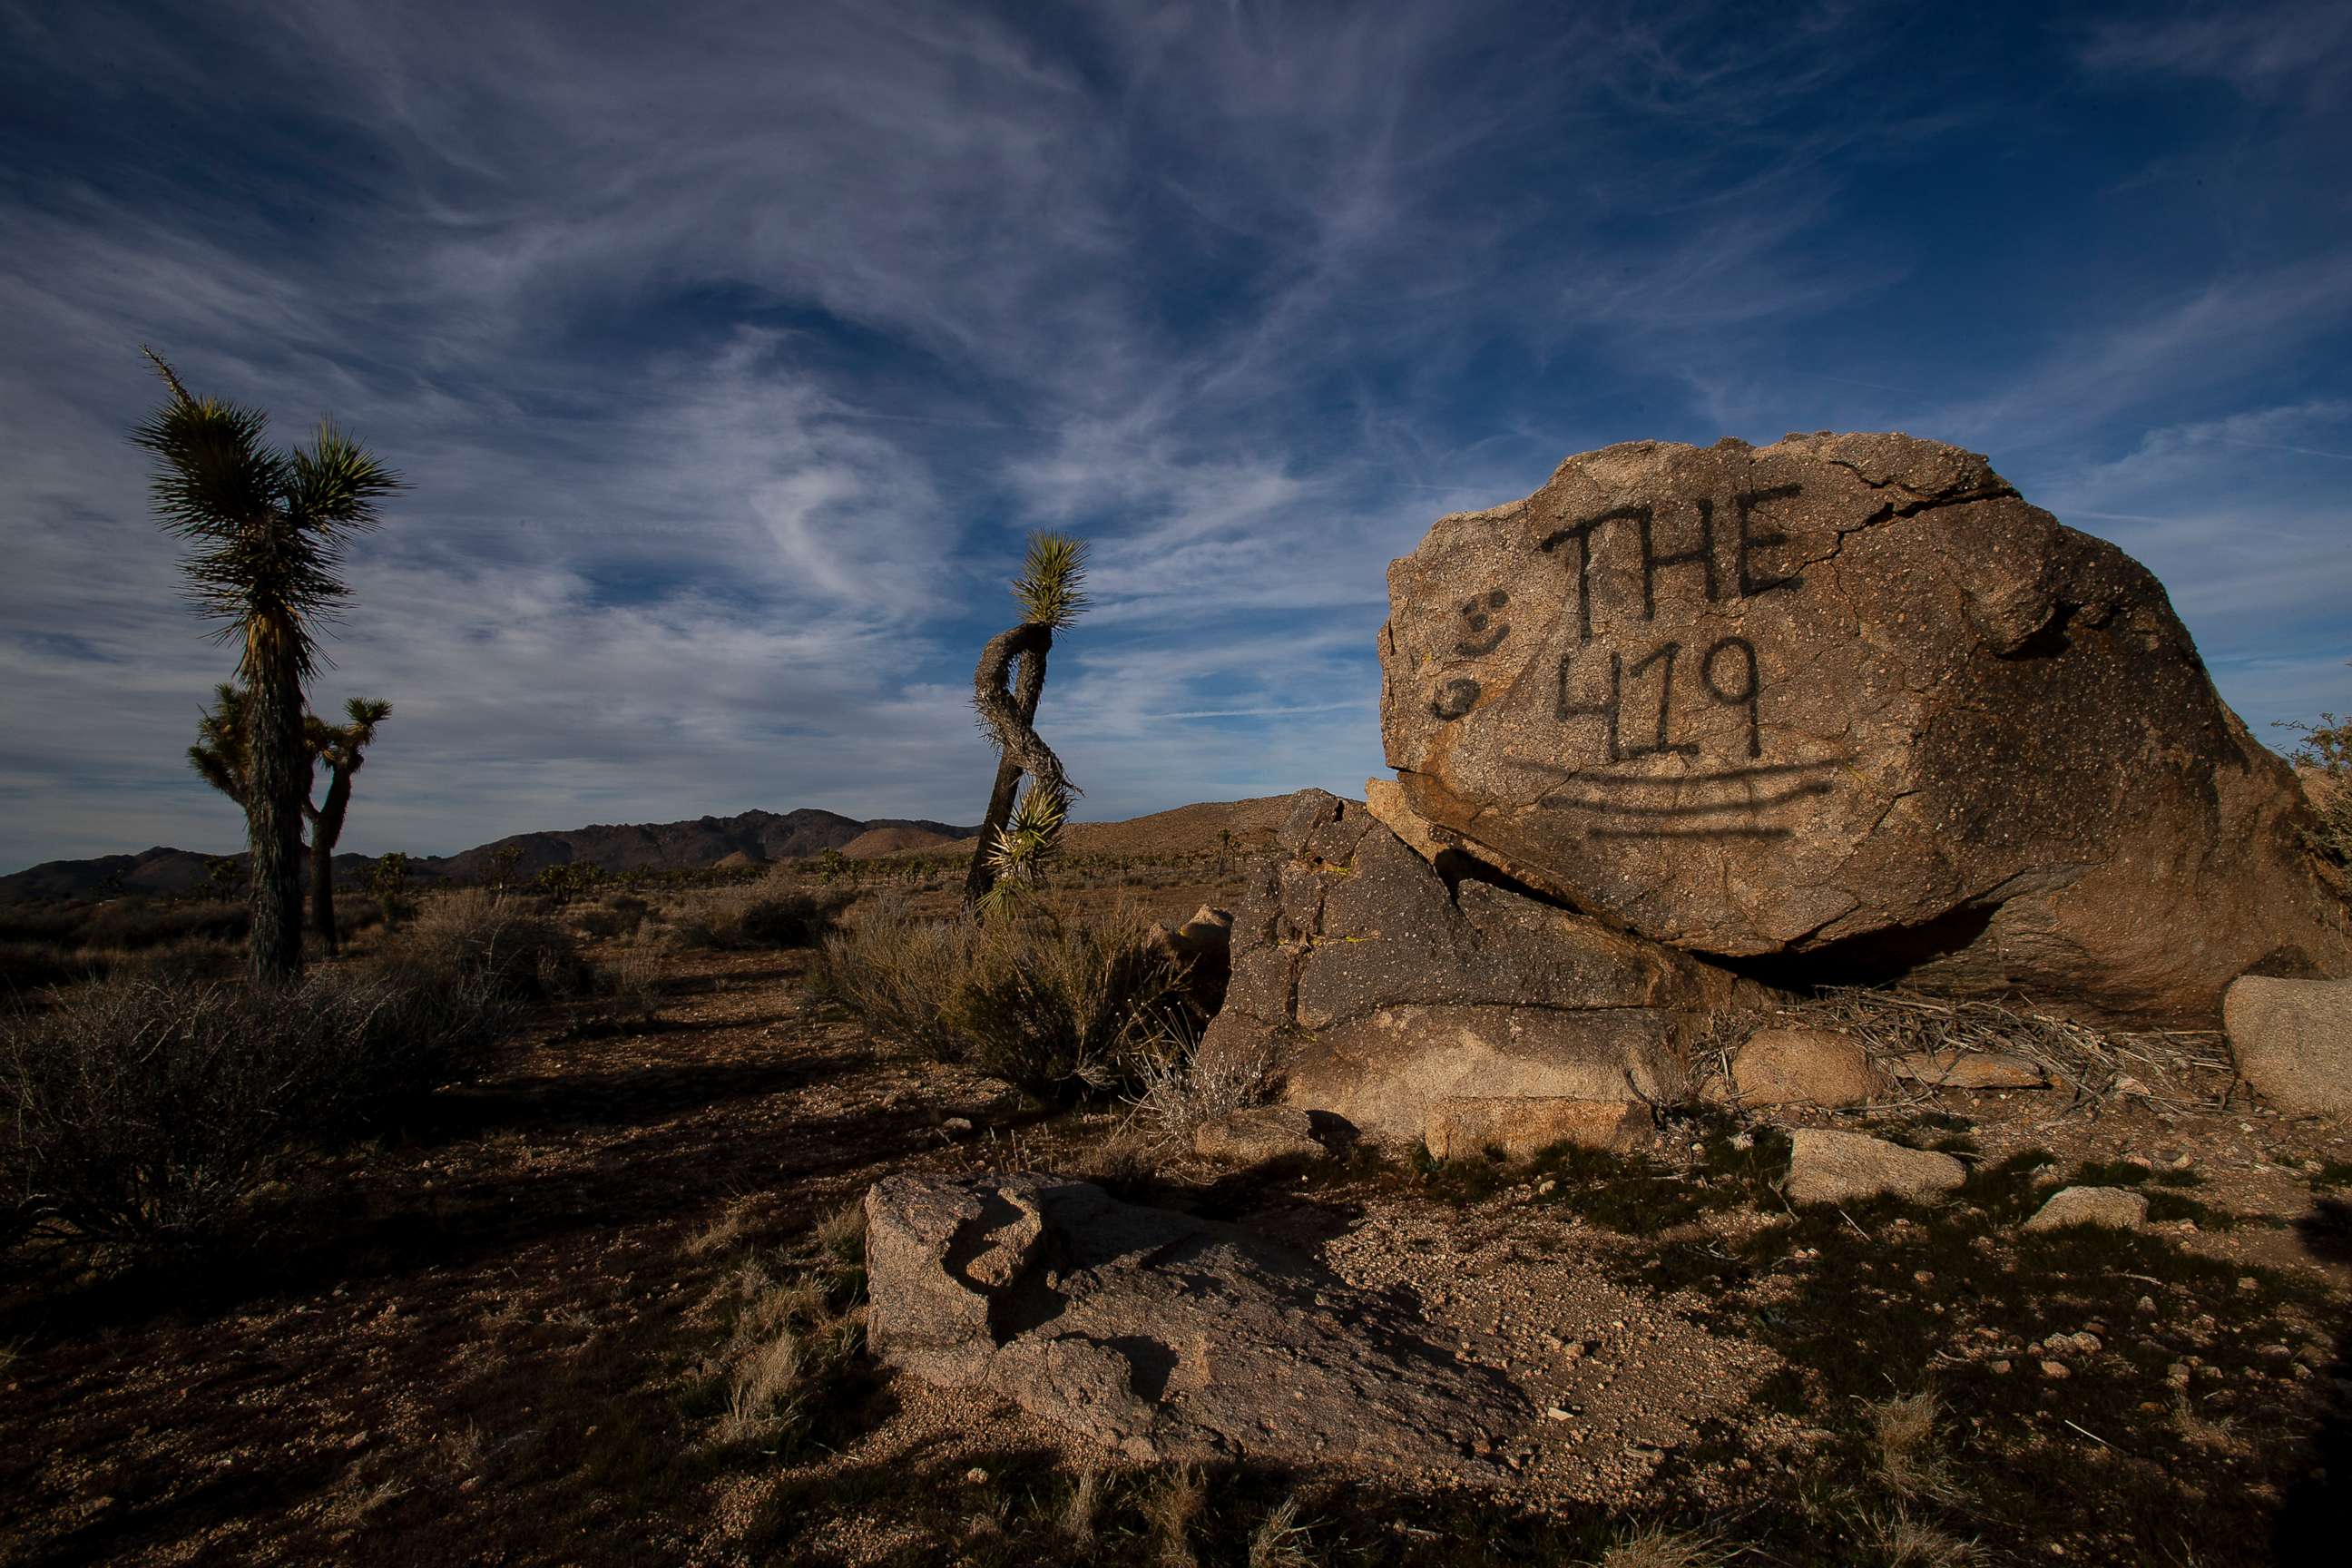 PHOTO: A rock has been vandalized with graffiti in Joshua Tree National Park on Jan. 8, 2019 in Joshua Tree, Calif.